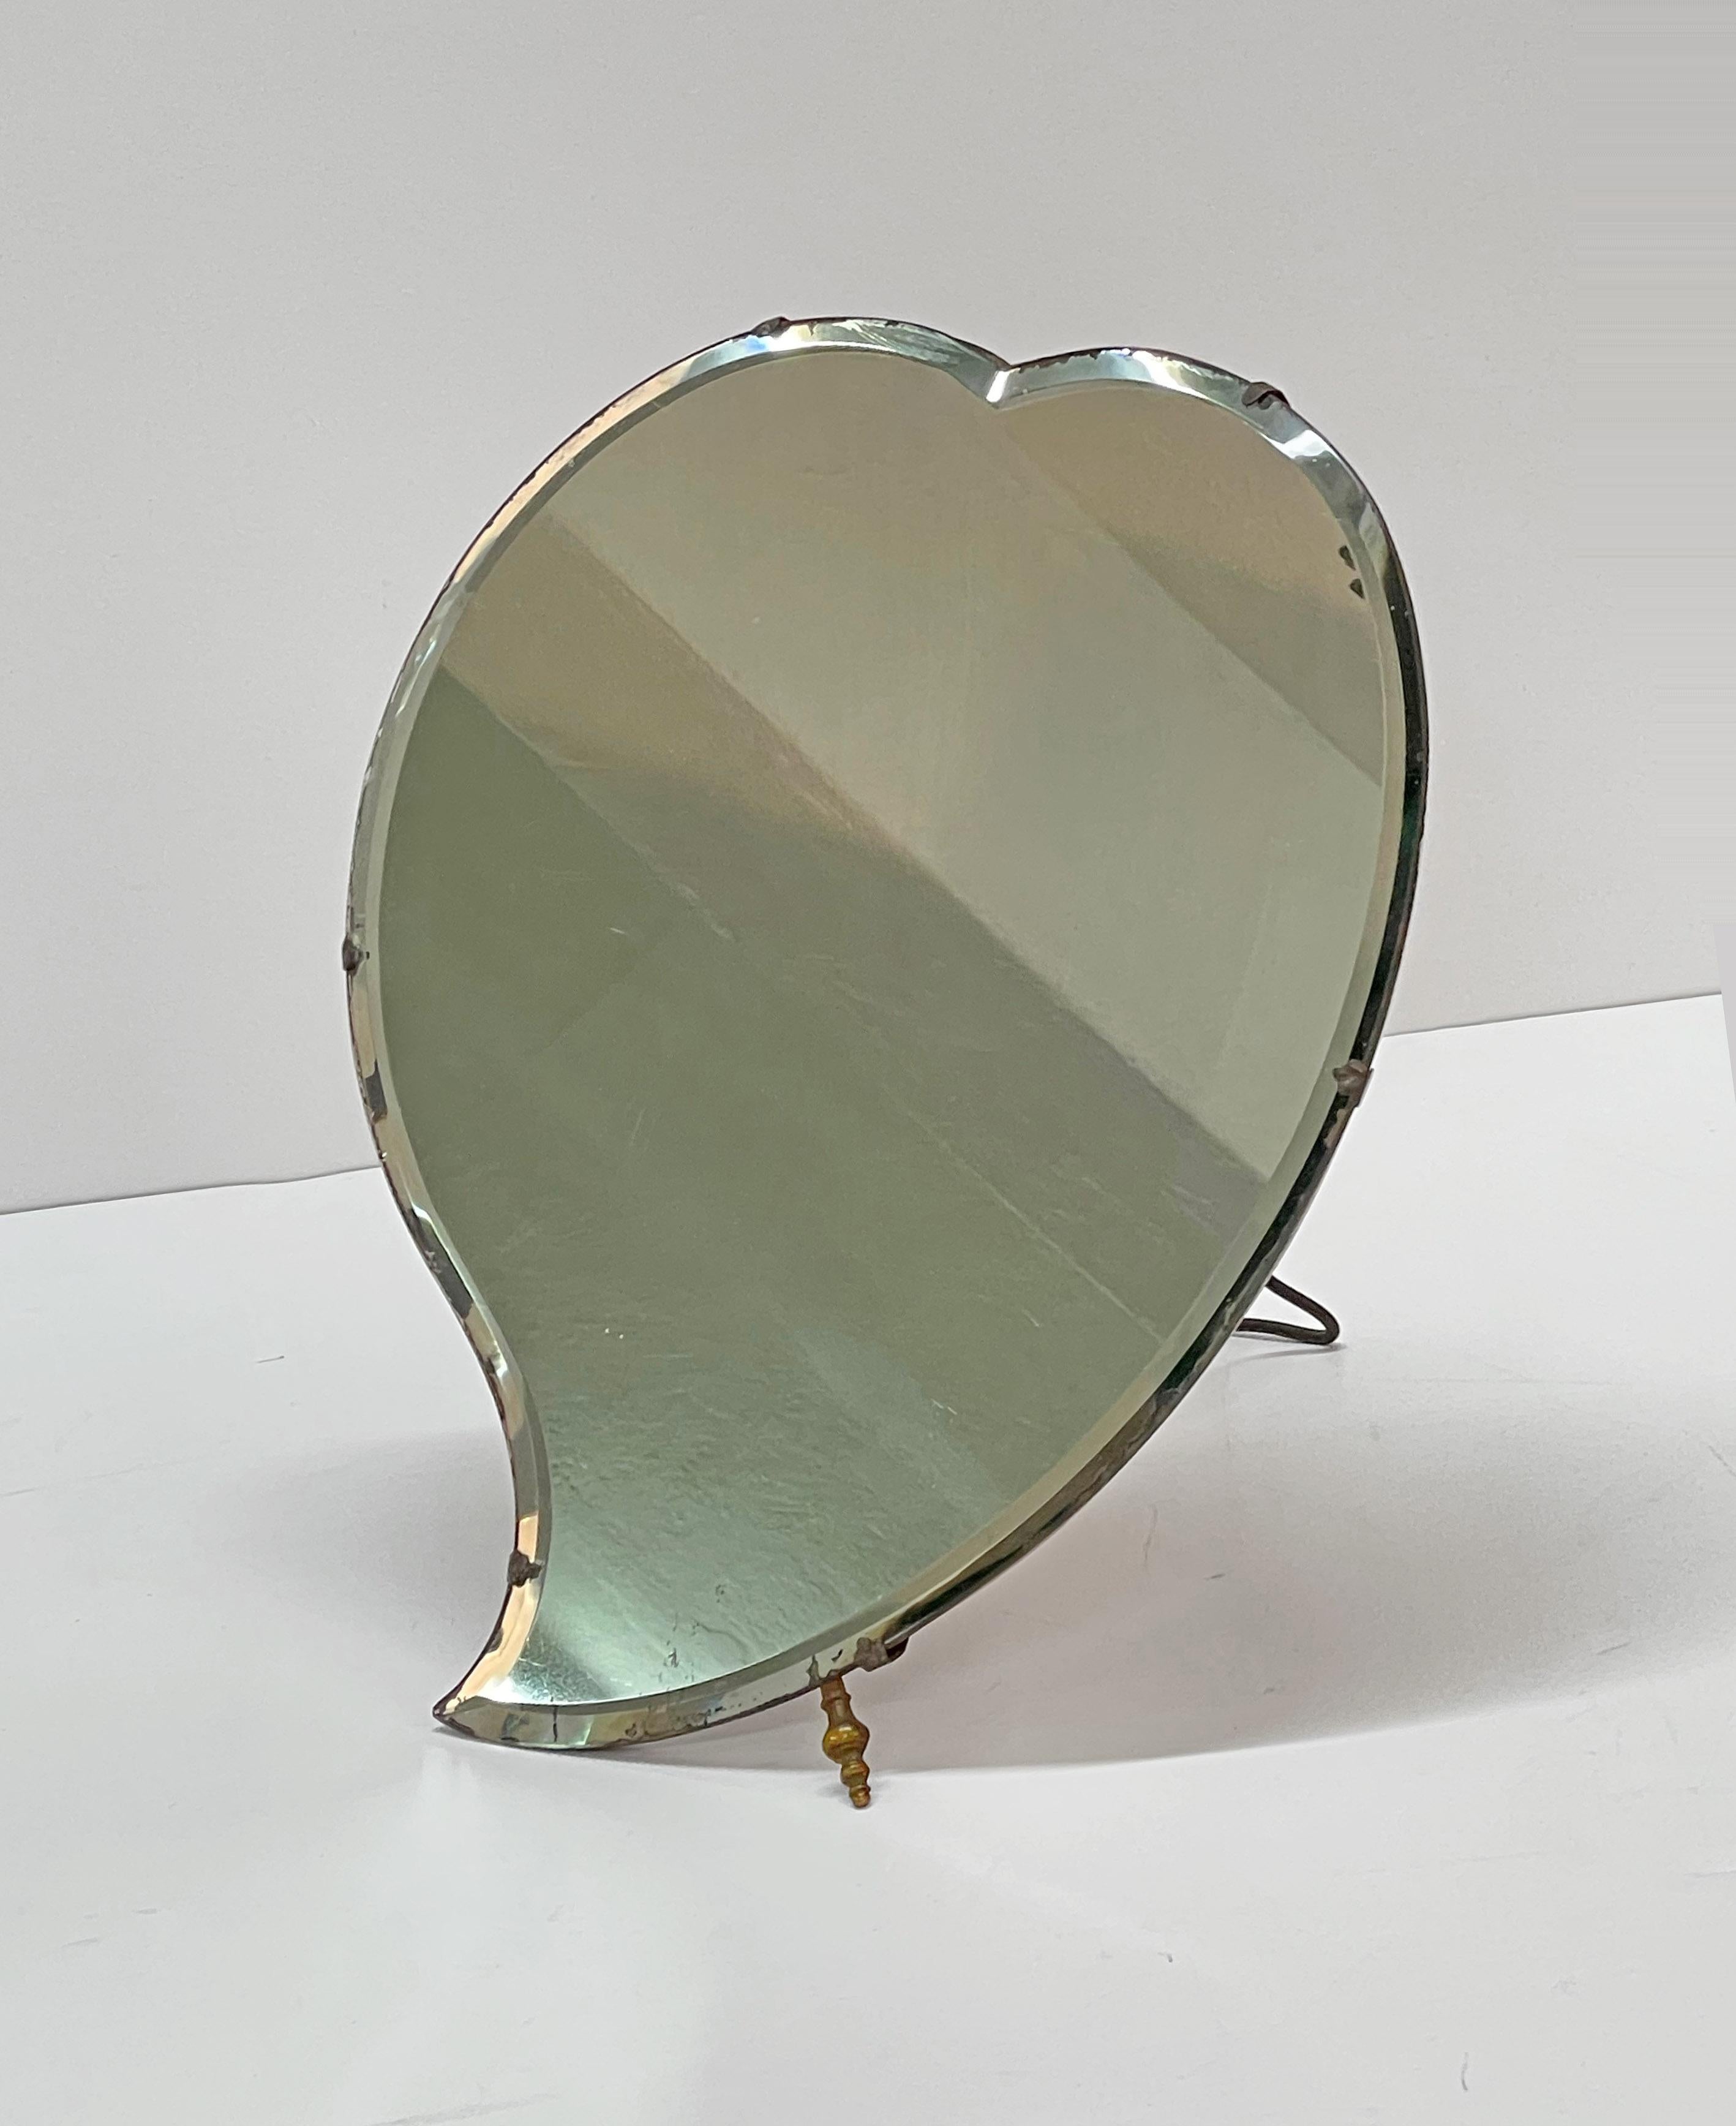 Wonderful midcentury heart-shaped table mirror. This fantastic piece was designed in Italy during the 1940s by Luigi Fontana and C.

This item is amazing as it has a lovely heart shape and solid cherry wood and iron back structure. The mirror has